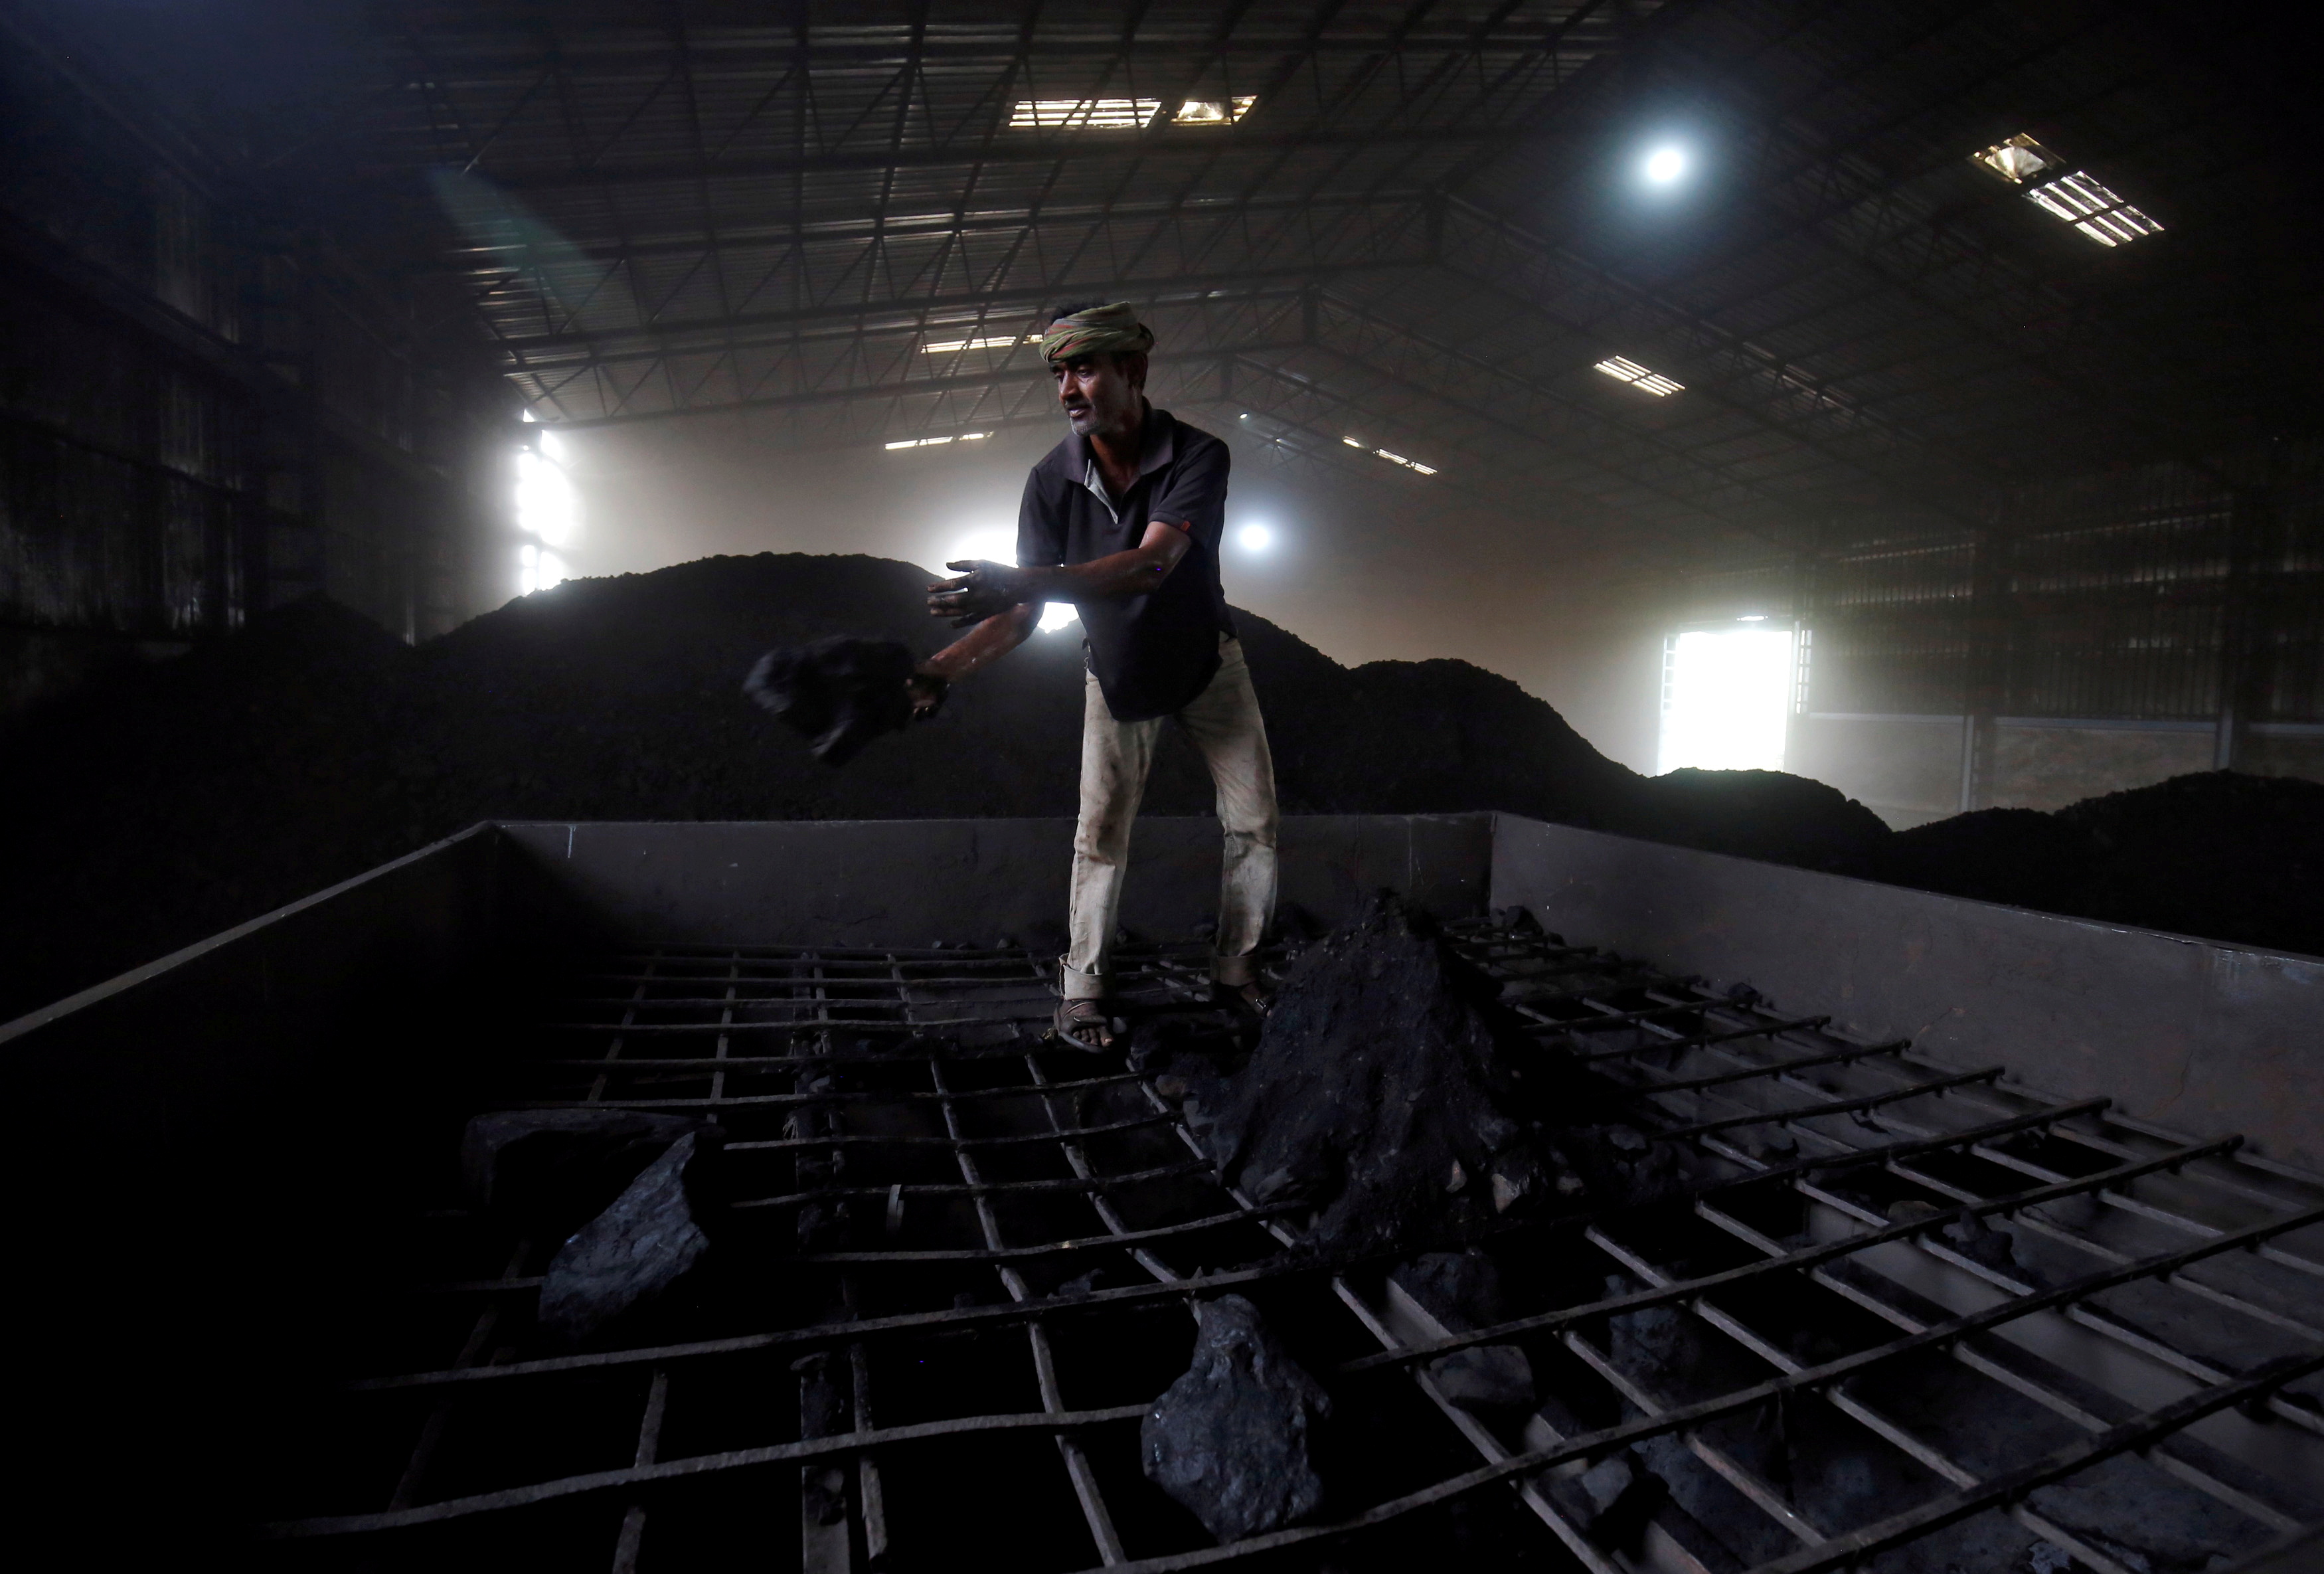 A worker shovels coal in a supply truck at a yard on the outskirts of Ahmedabad